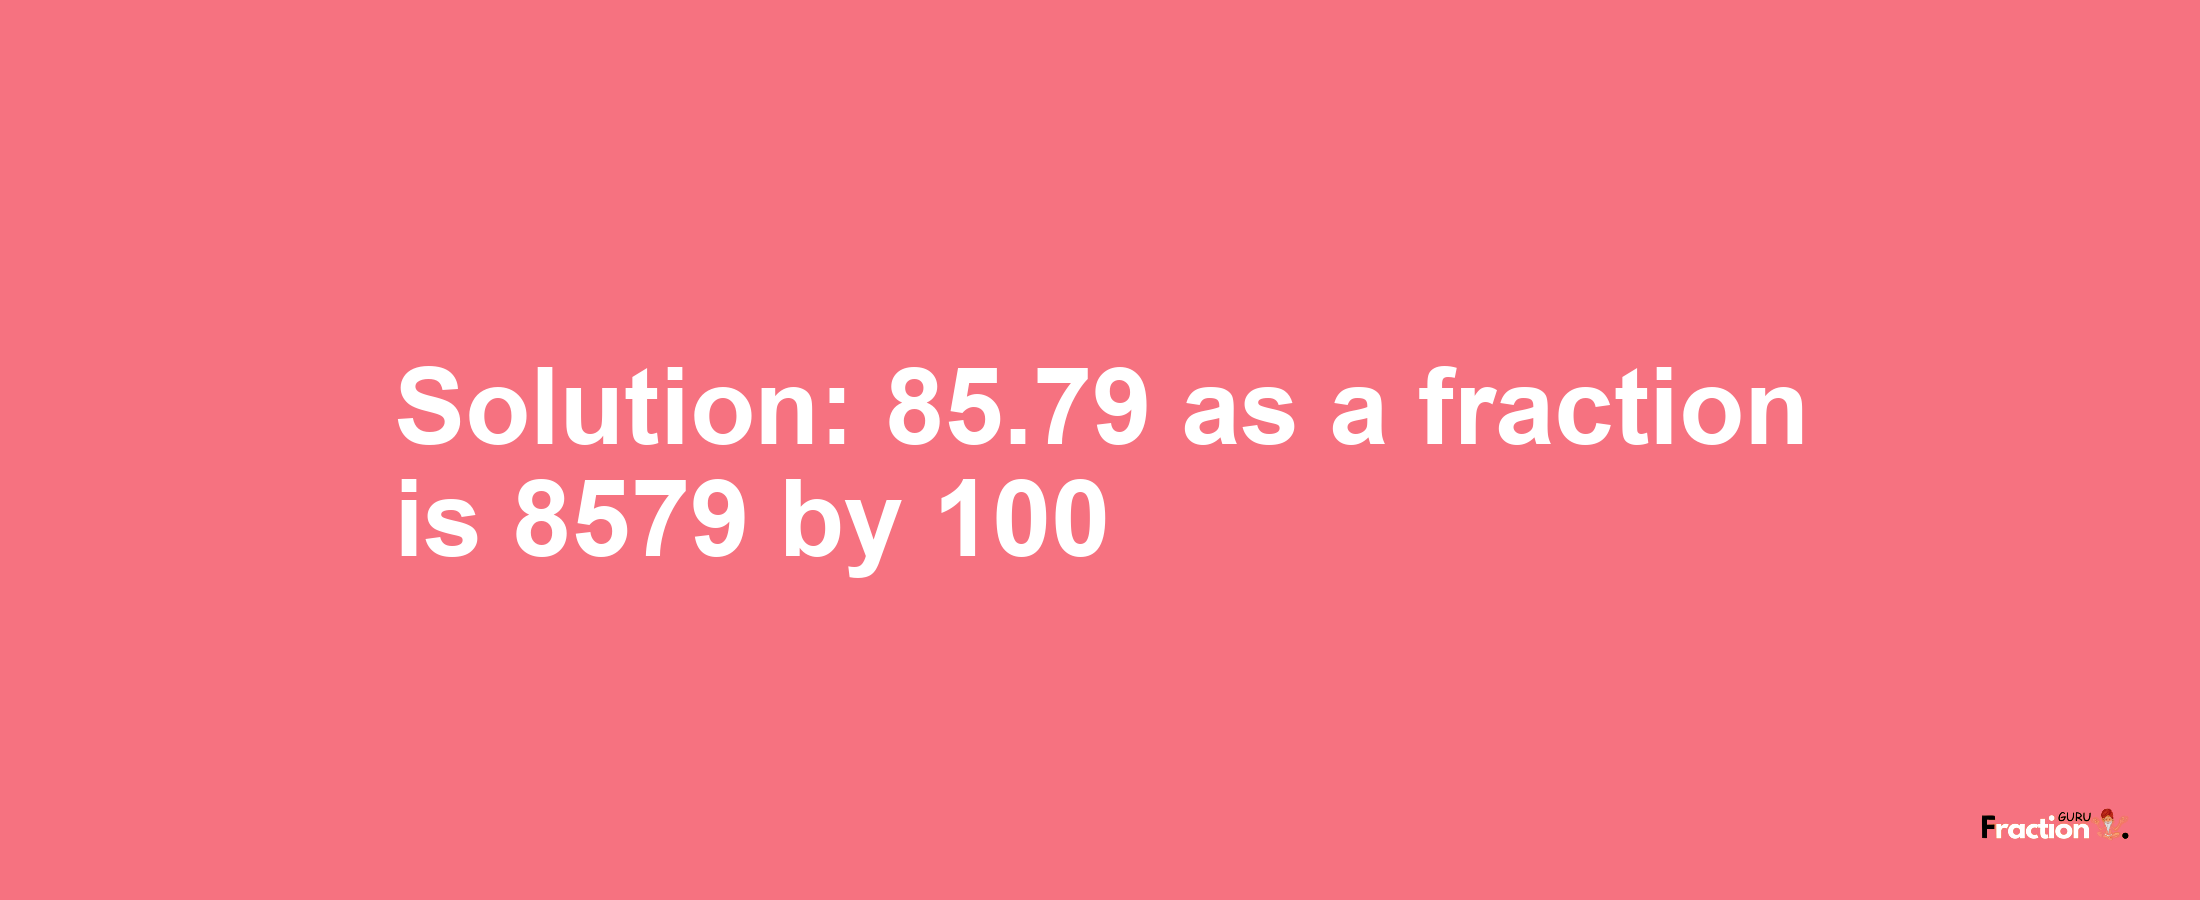 Solution:85.79 as a fraction is 8579/100